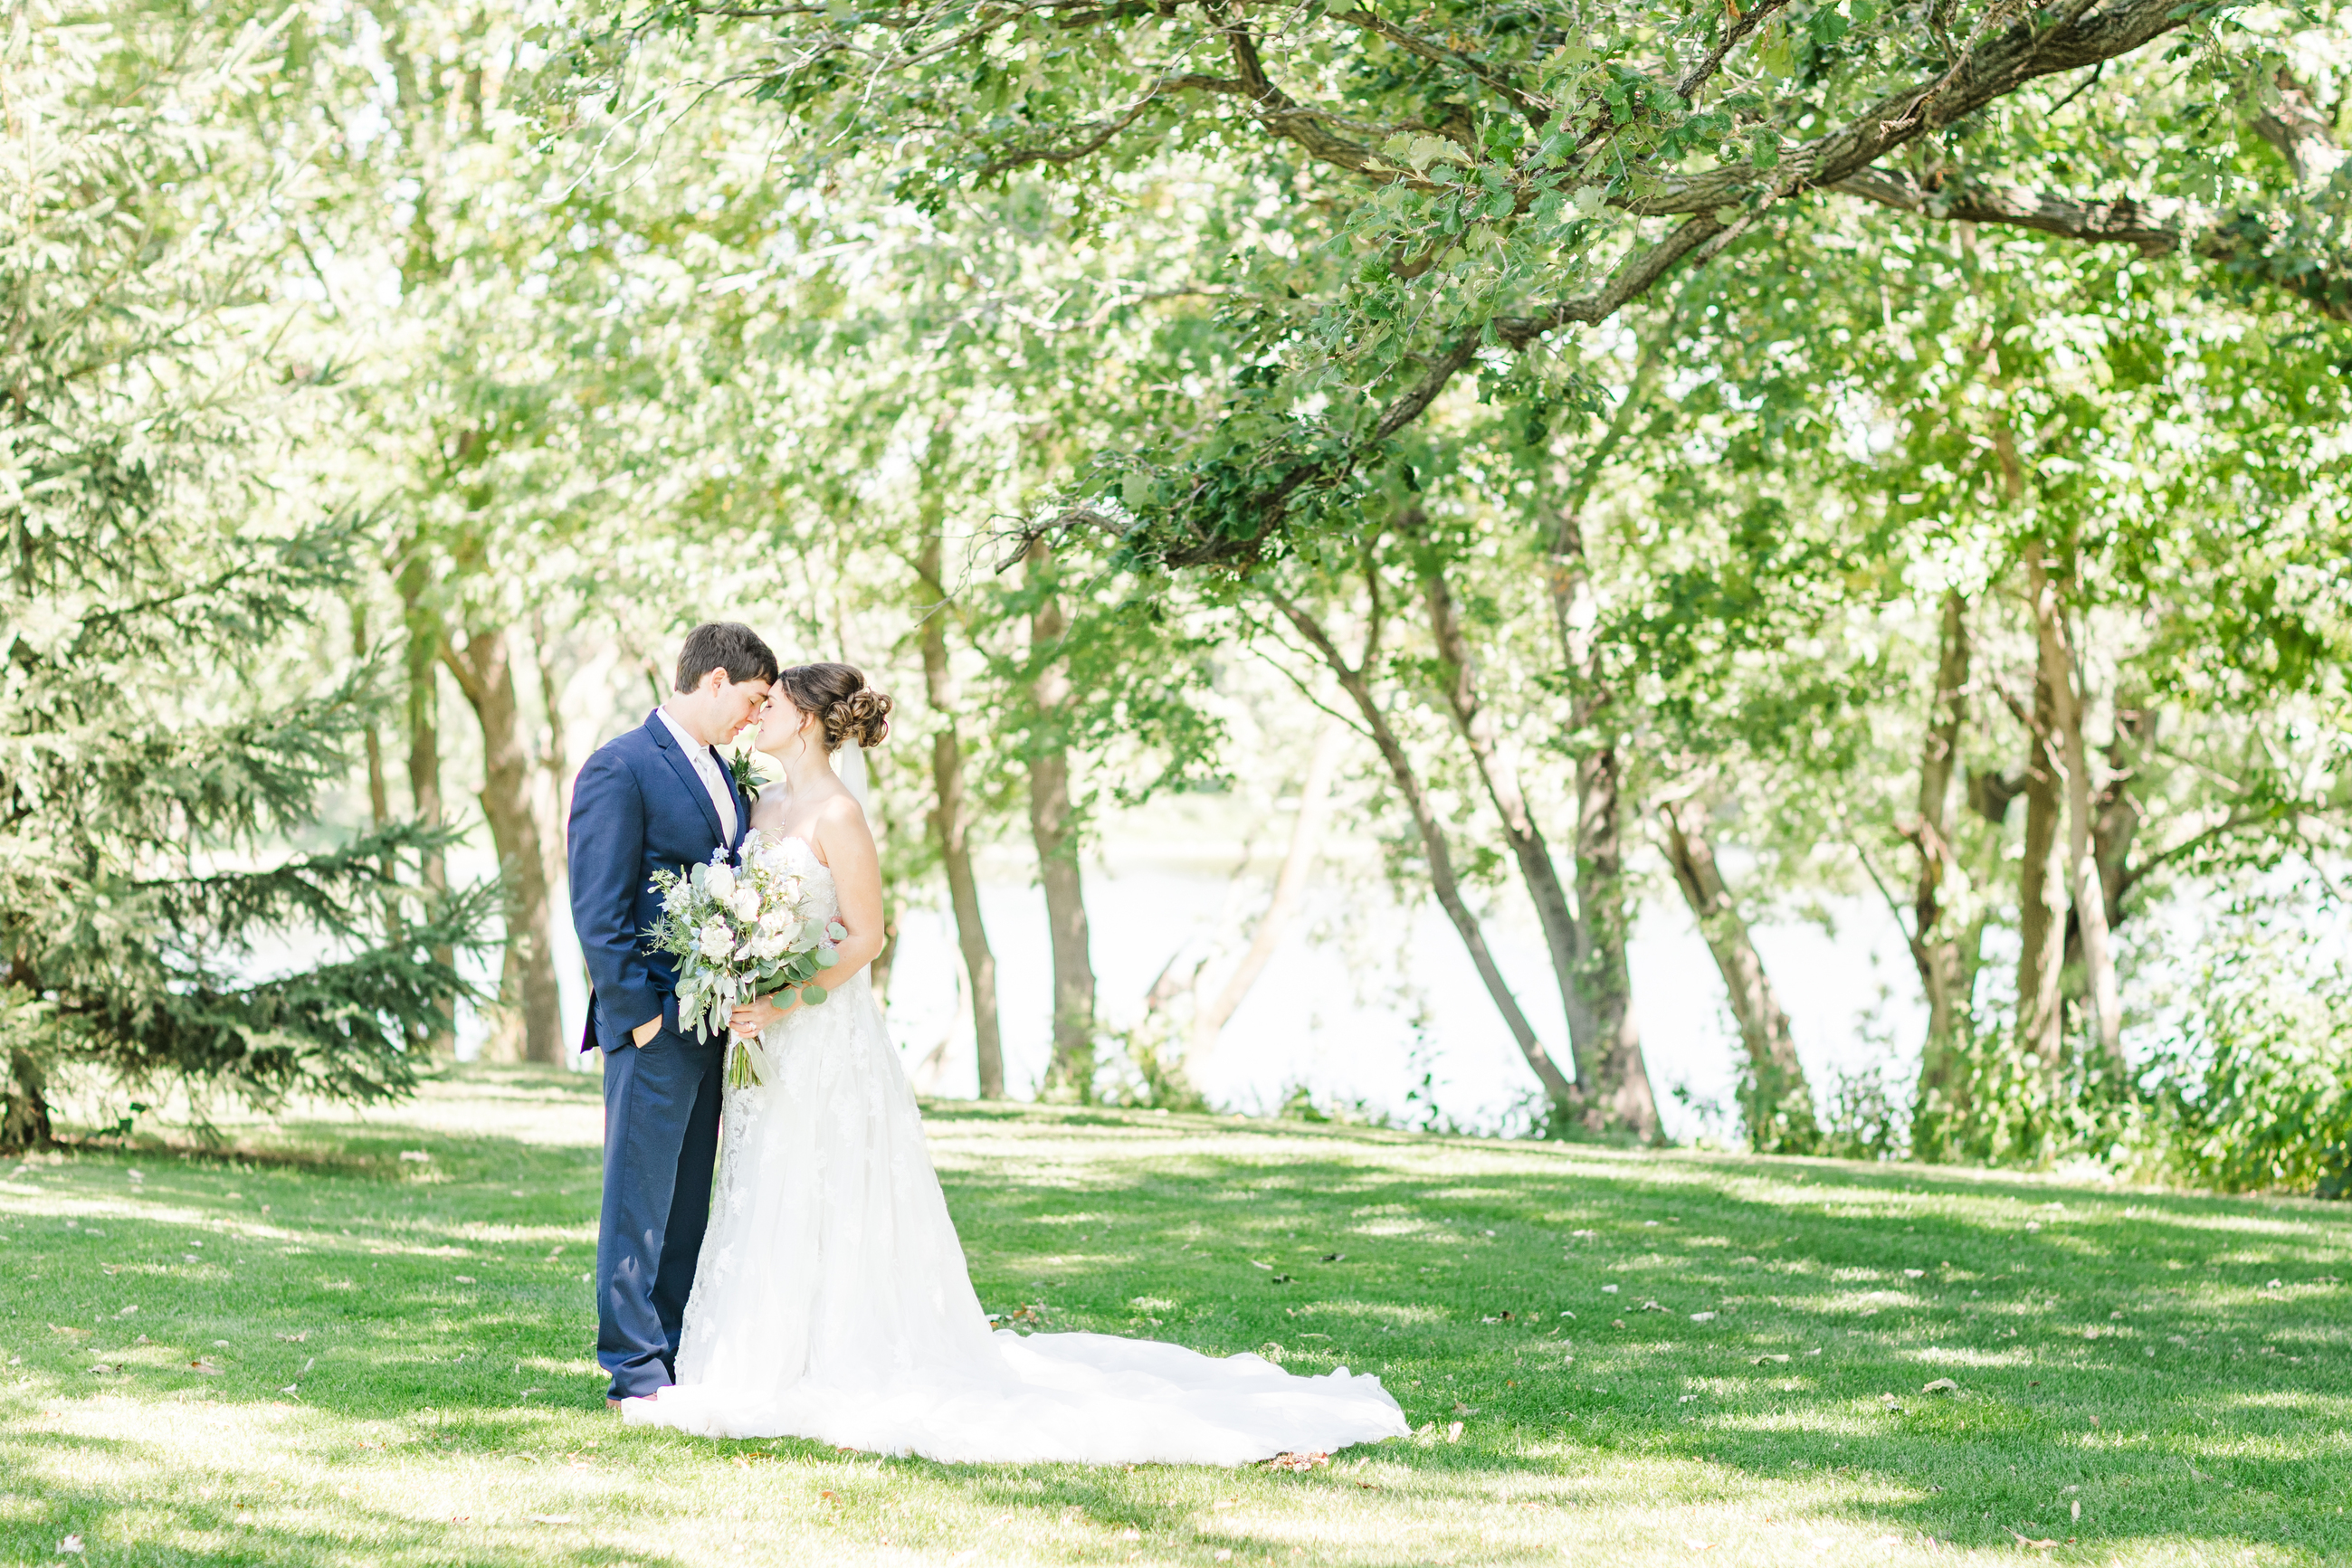 Picture-Perfect Outdoor Wedding in Sophia Tolli's Dreamy "Maeve" Gown